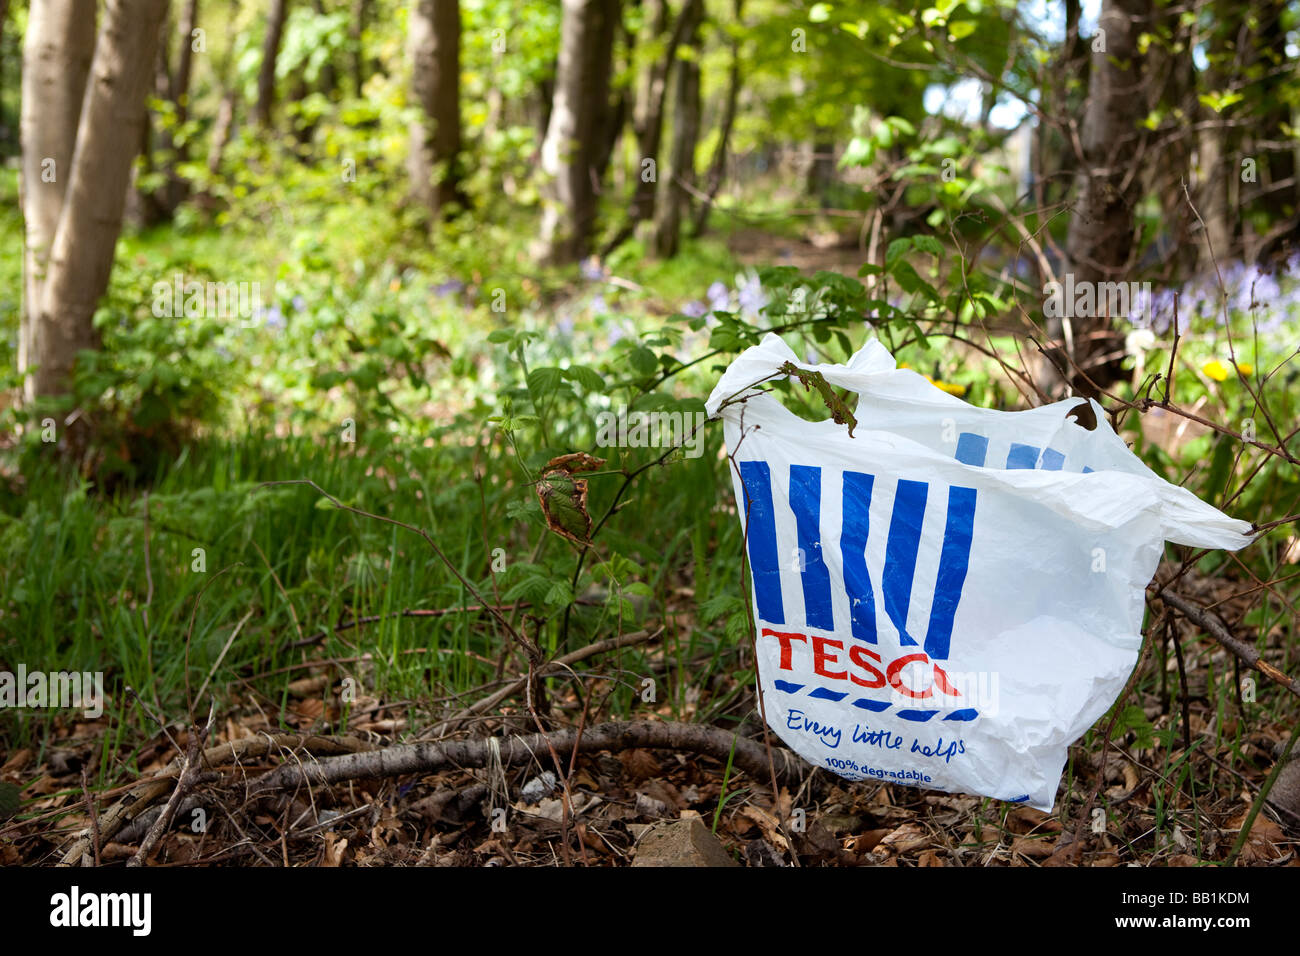 Tesco carrier bag in the woods Stock Photo